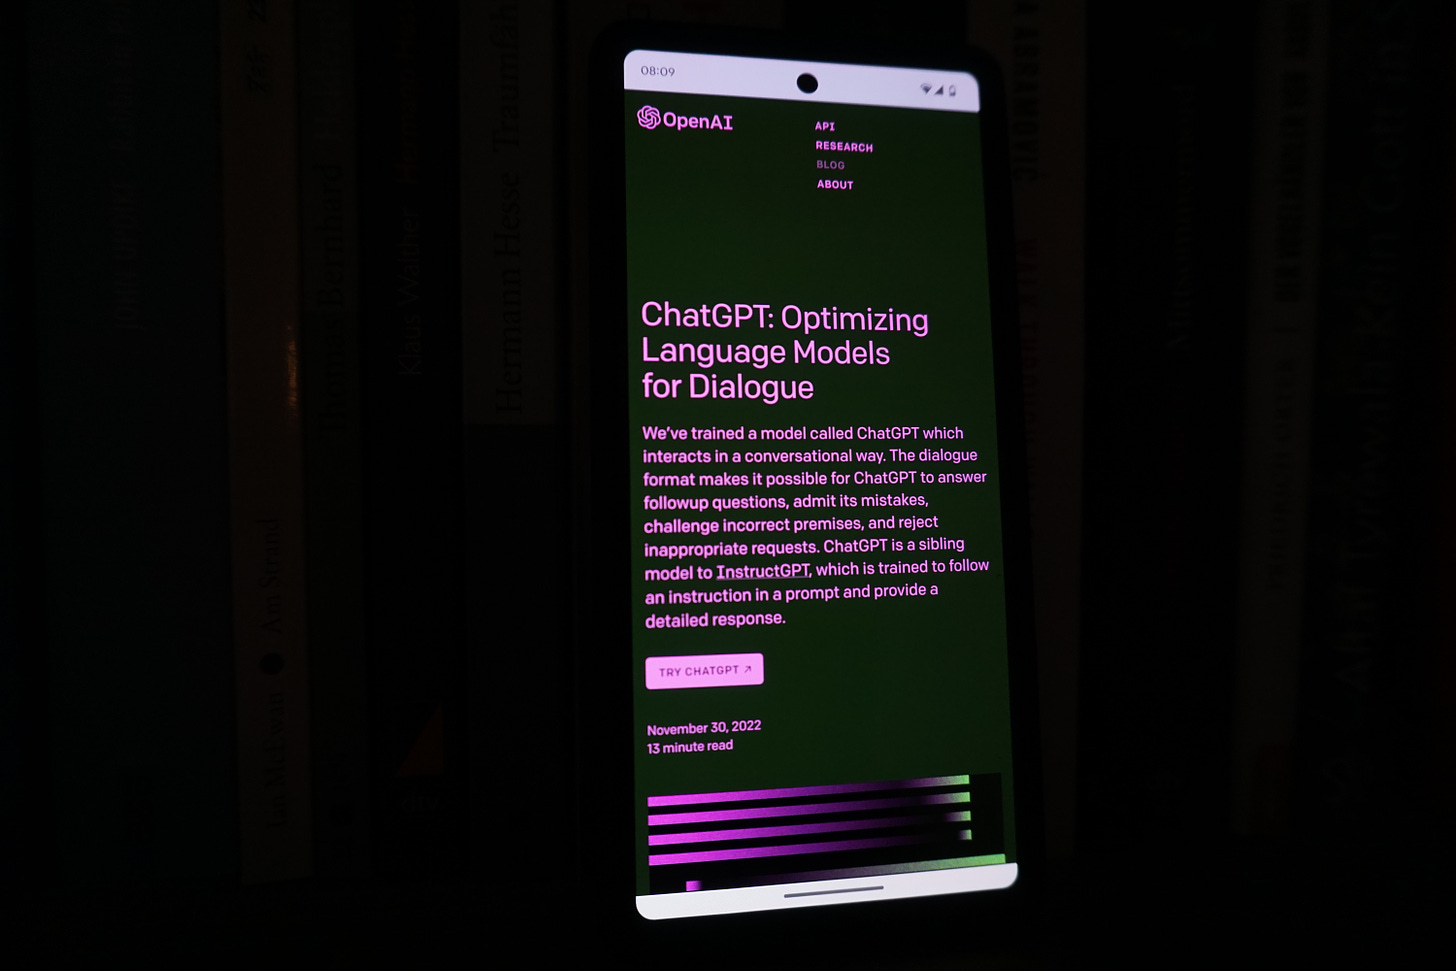 An image of a mobile phone with the ChatGPT site open